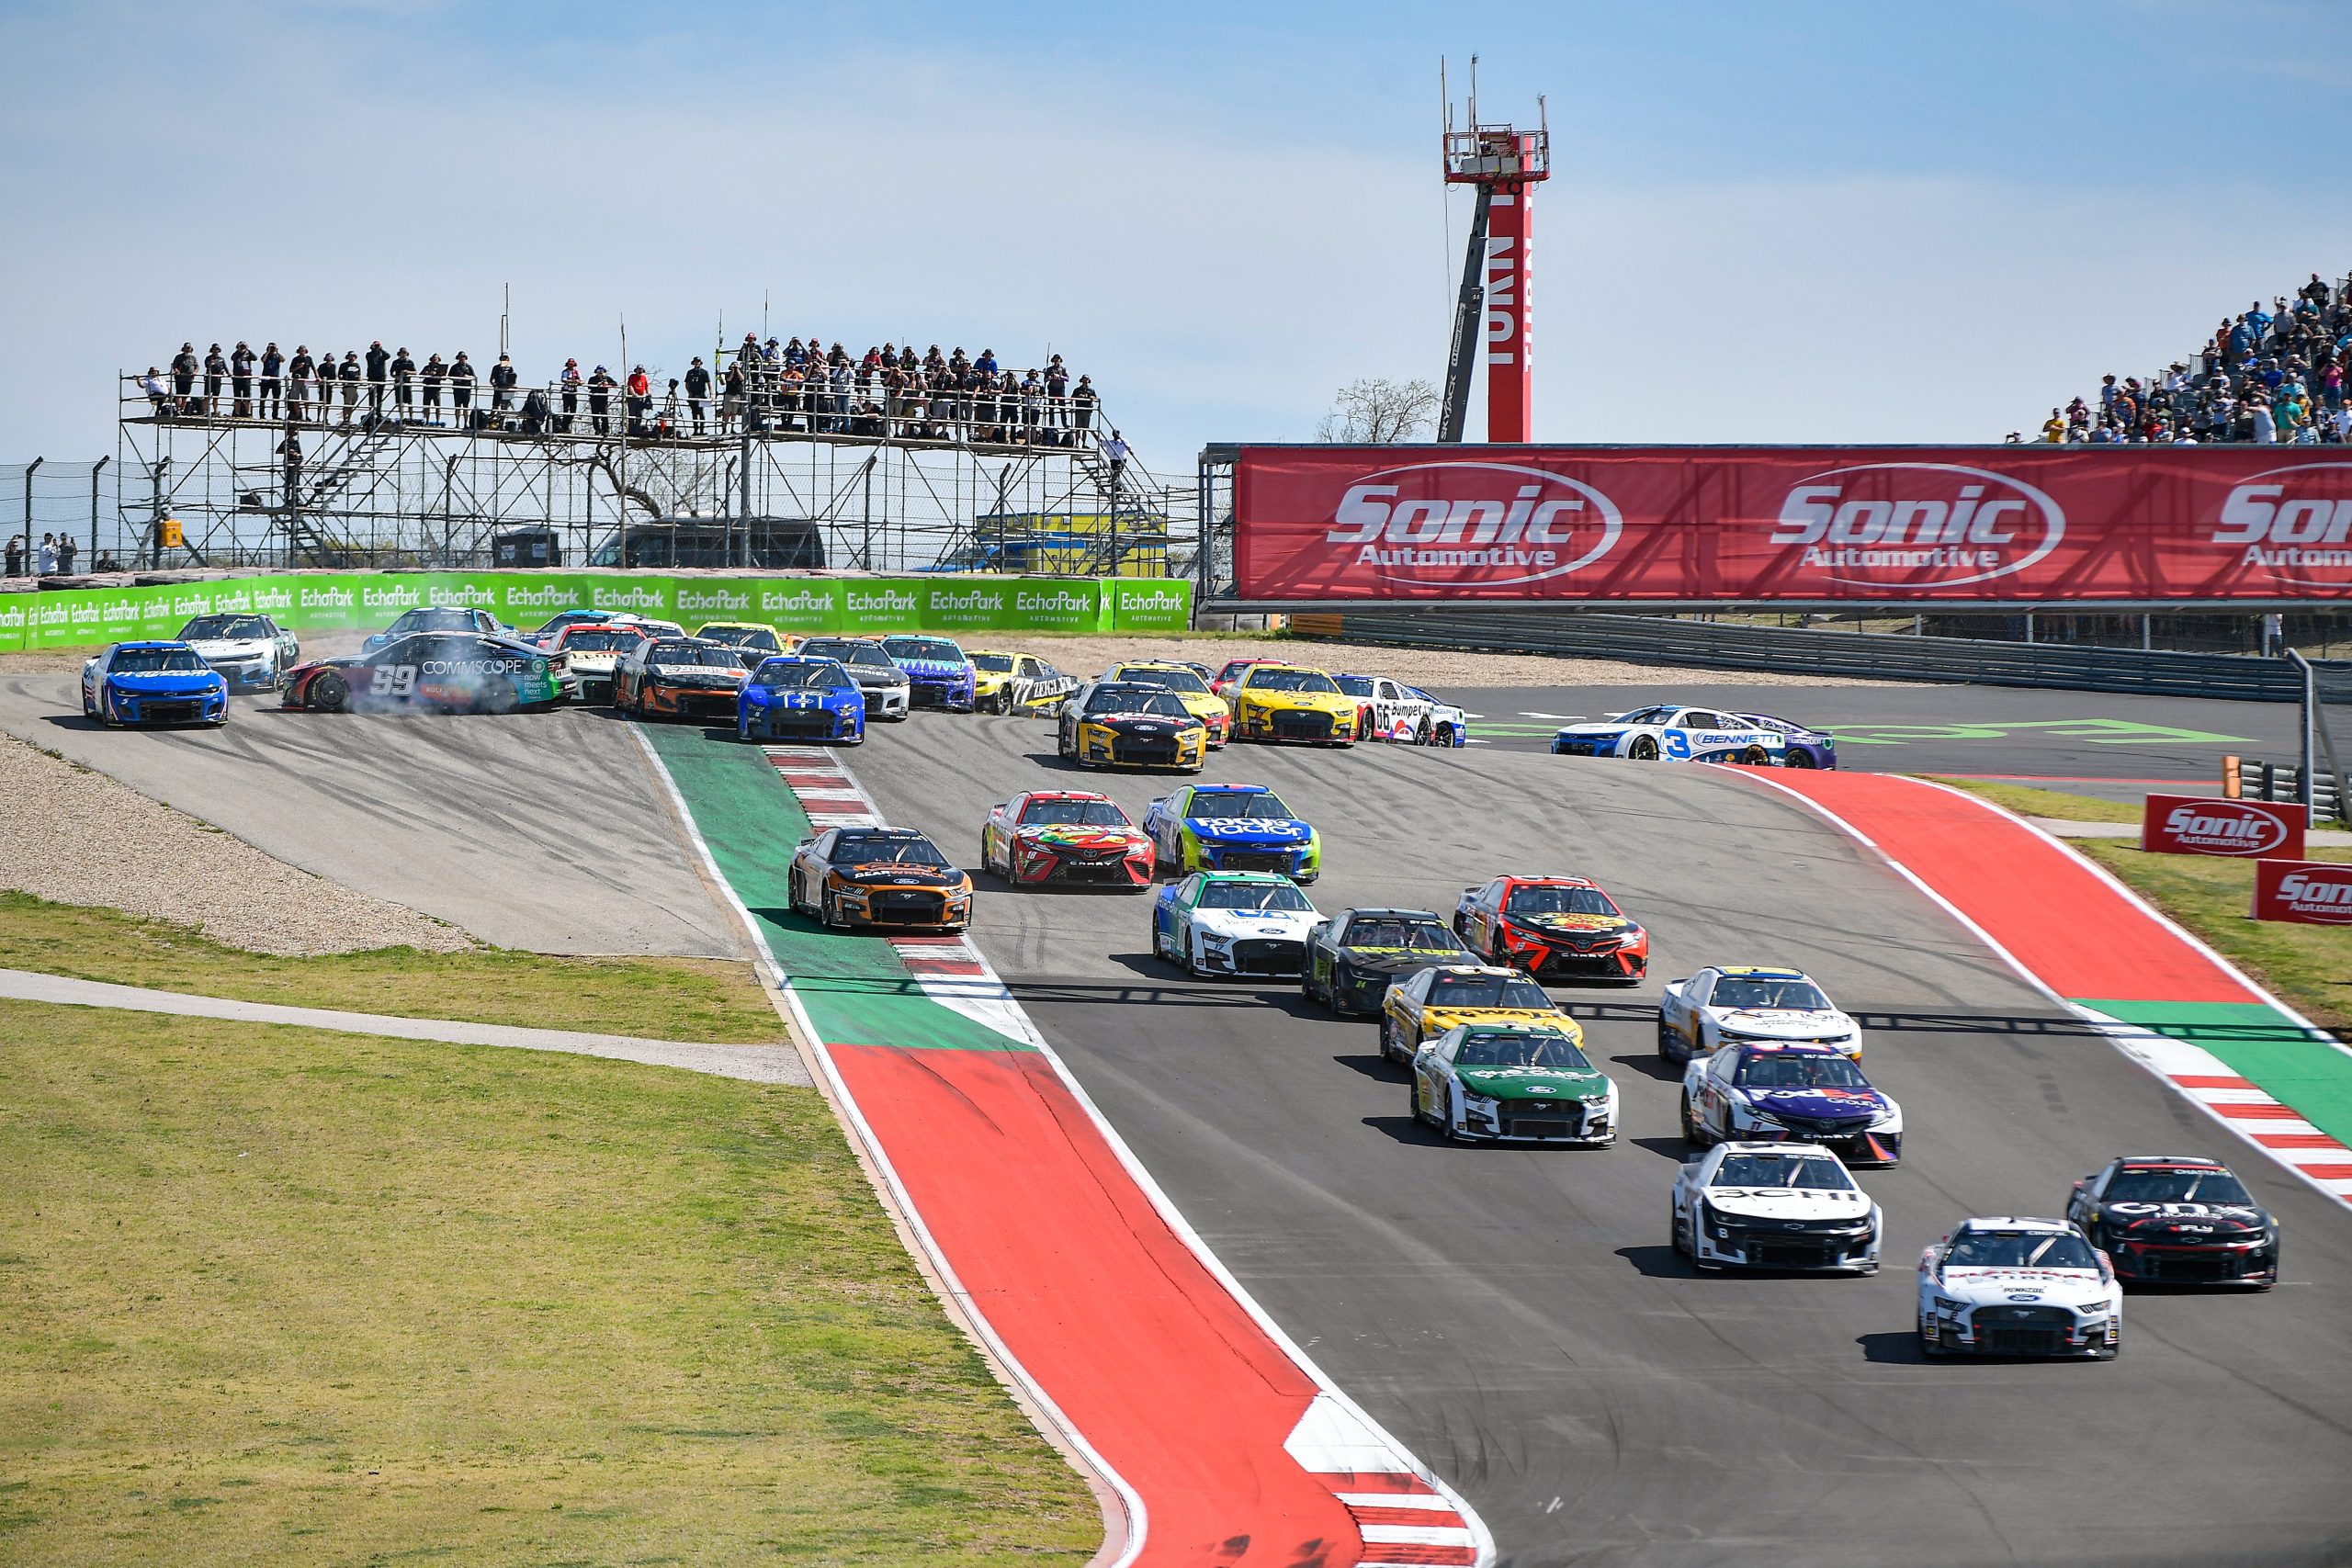 The opening lap at Circuit of the Americas